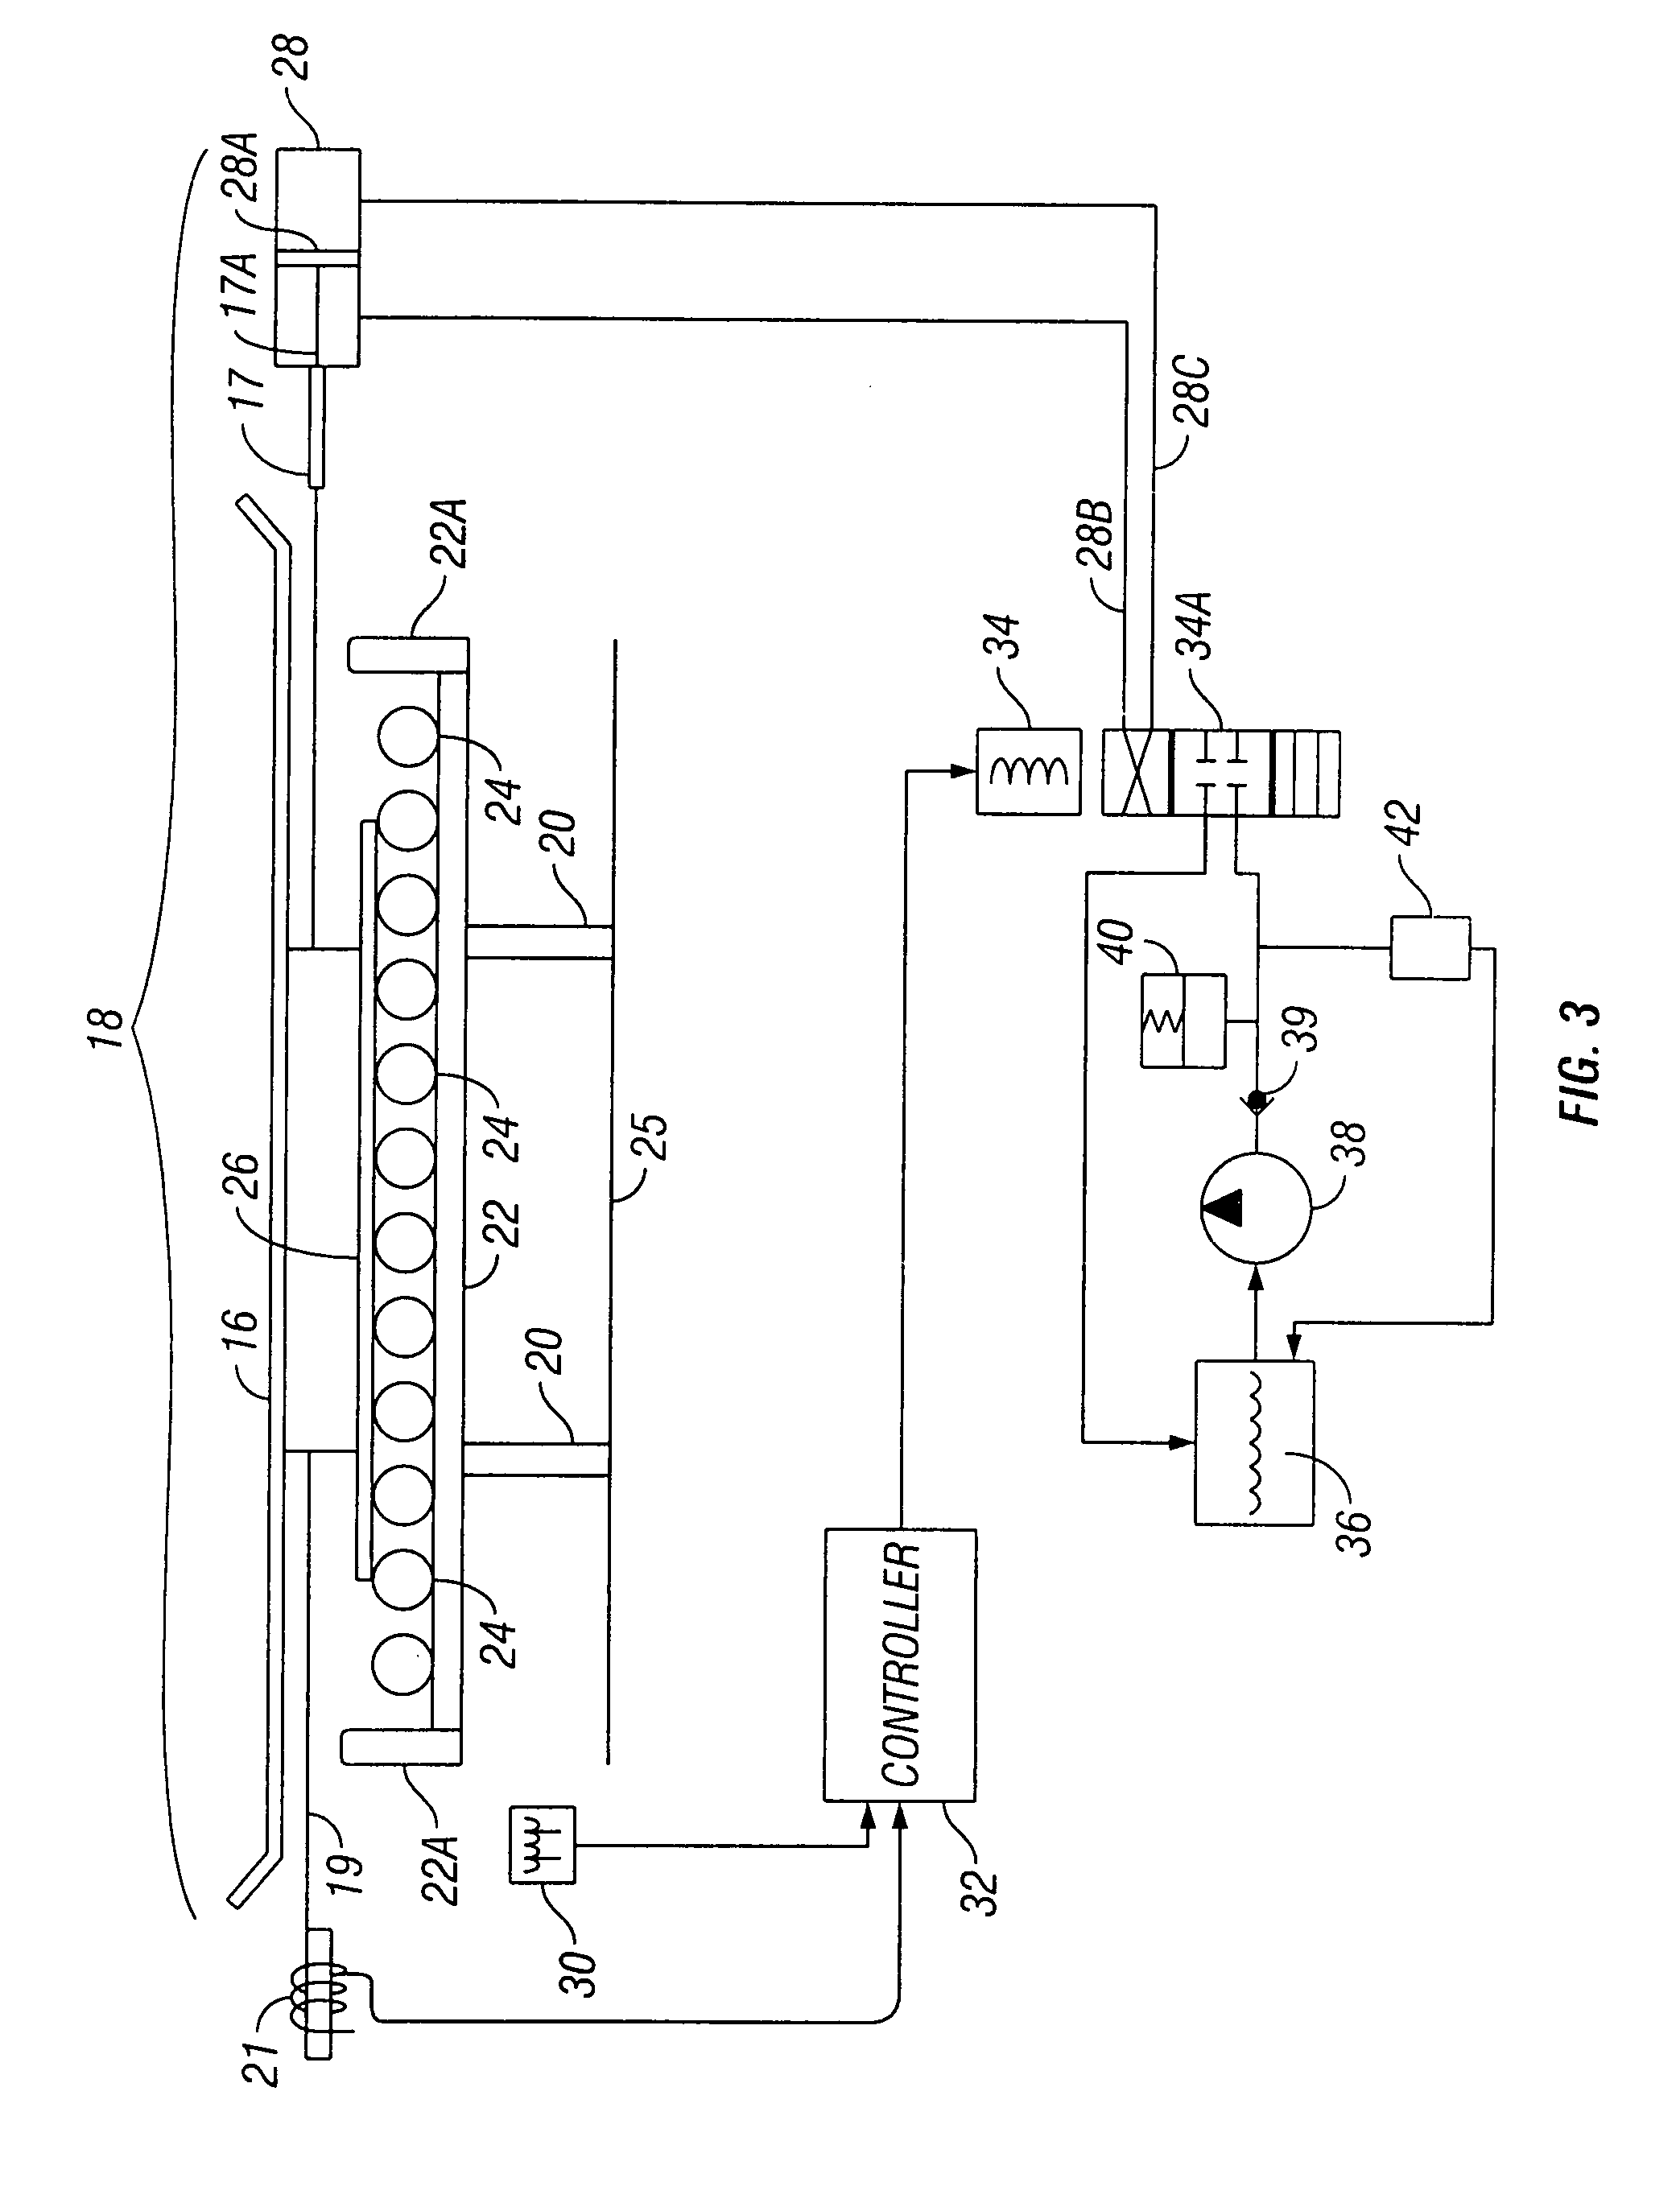 Helicopter landing platform having motion stabilizer for compensating ship roll and/or pitch